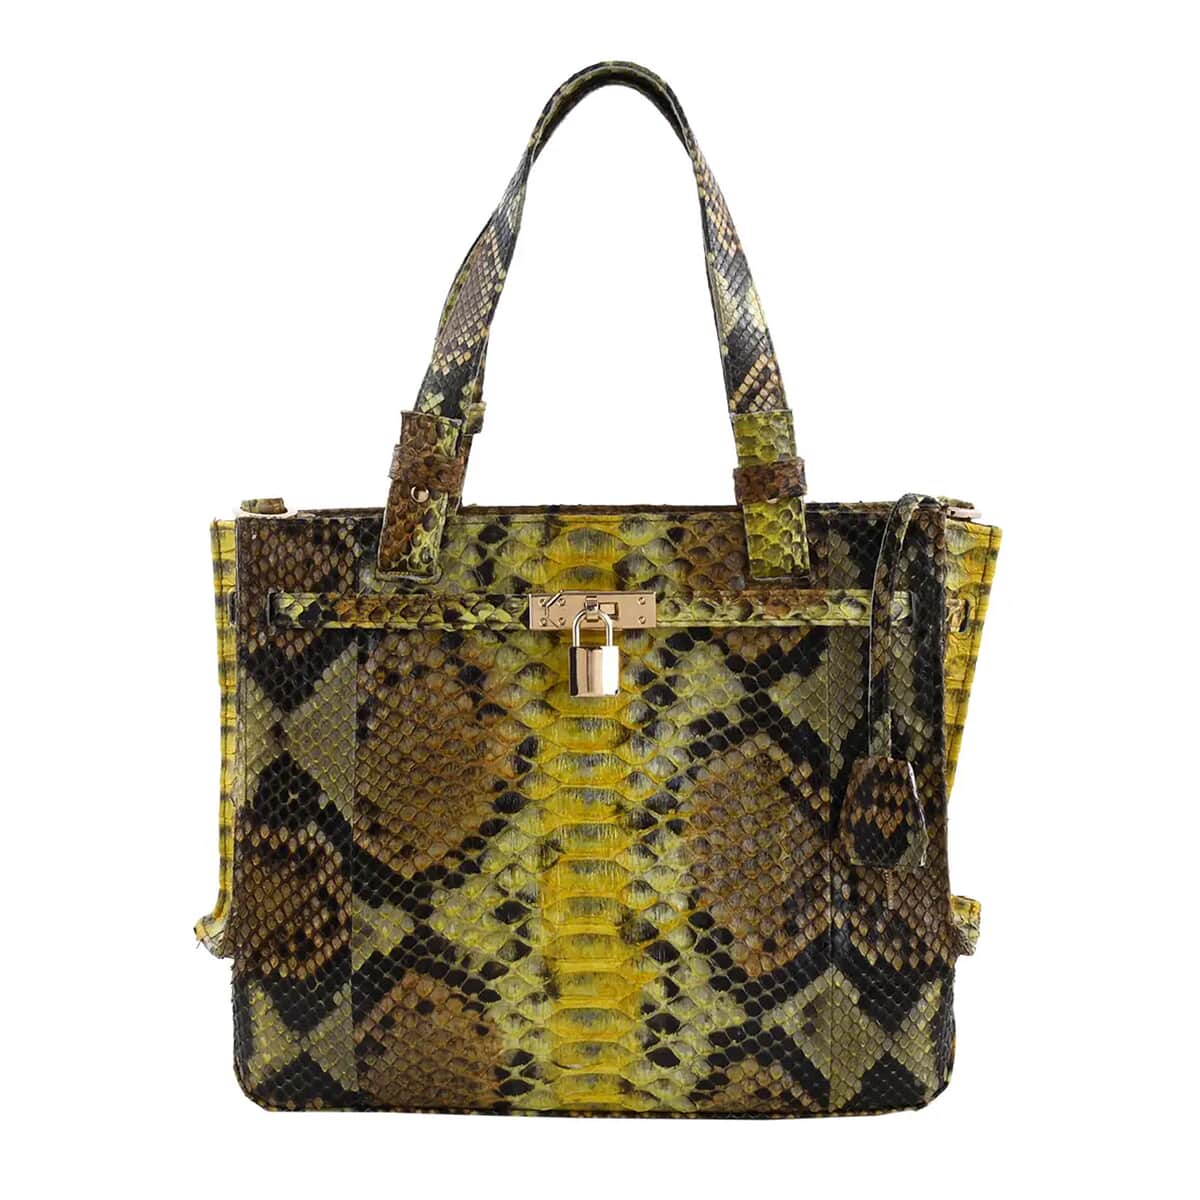 Buy The Pelle Python Collection Handmade 100% Genuine Python Leather ...